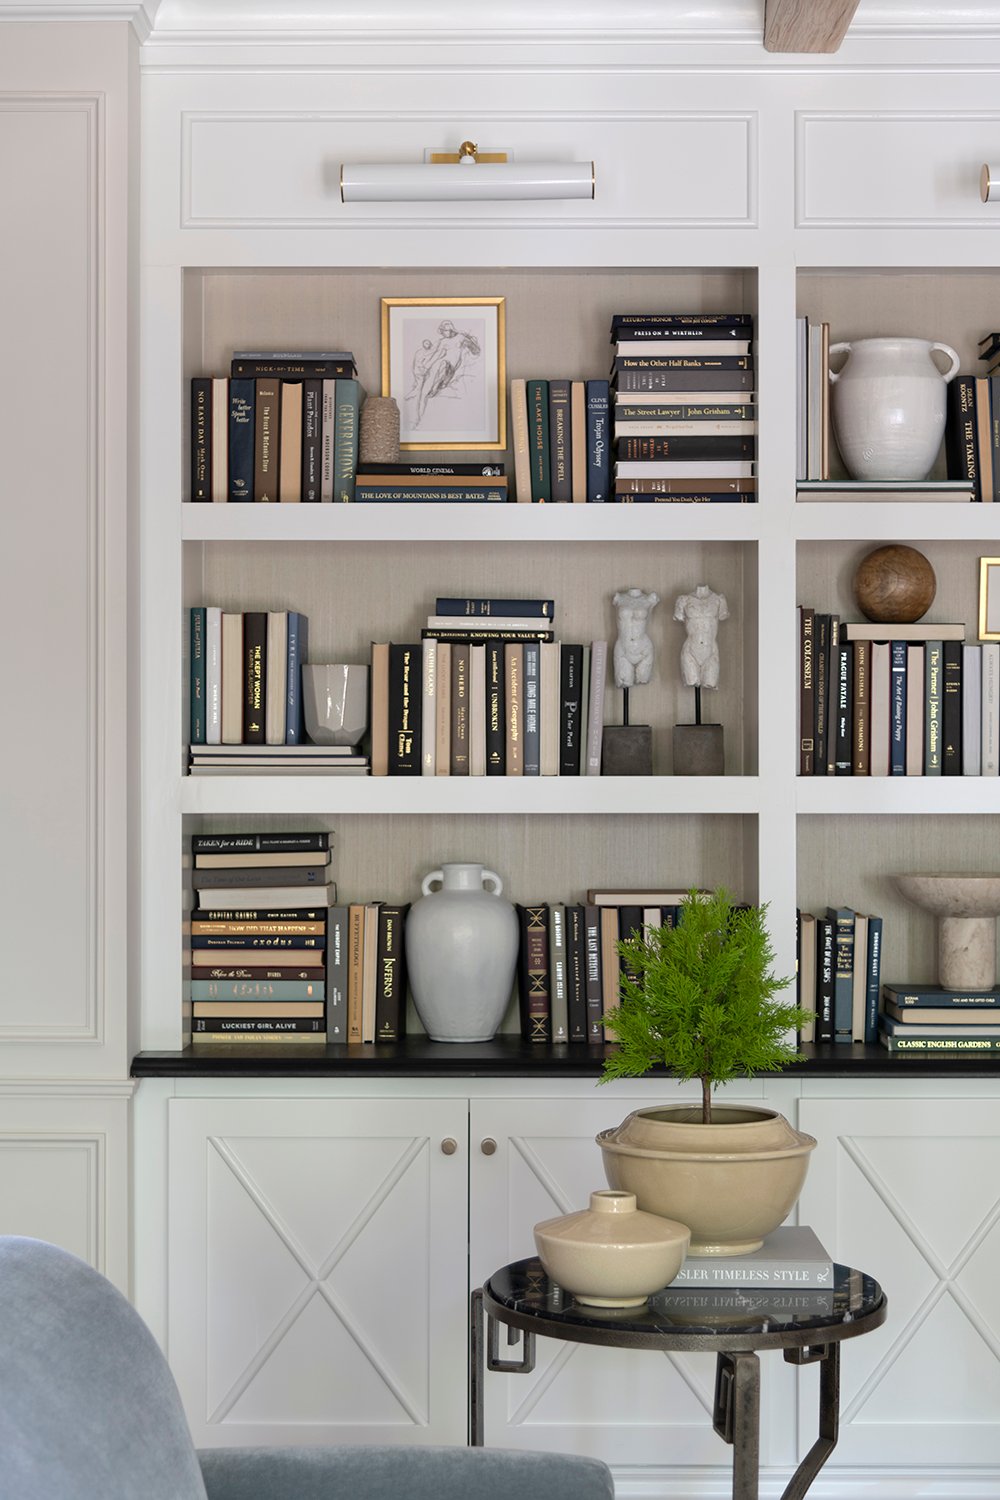 The Best Interior Design Books for Timeless Home Inspiration - Room for Tuesday